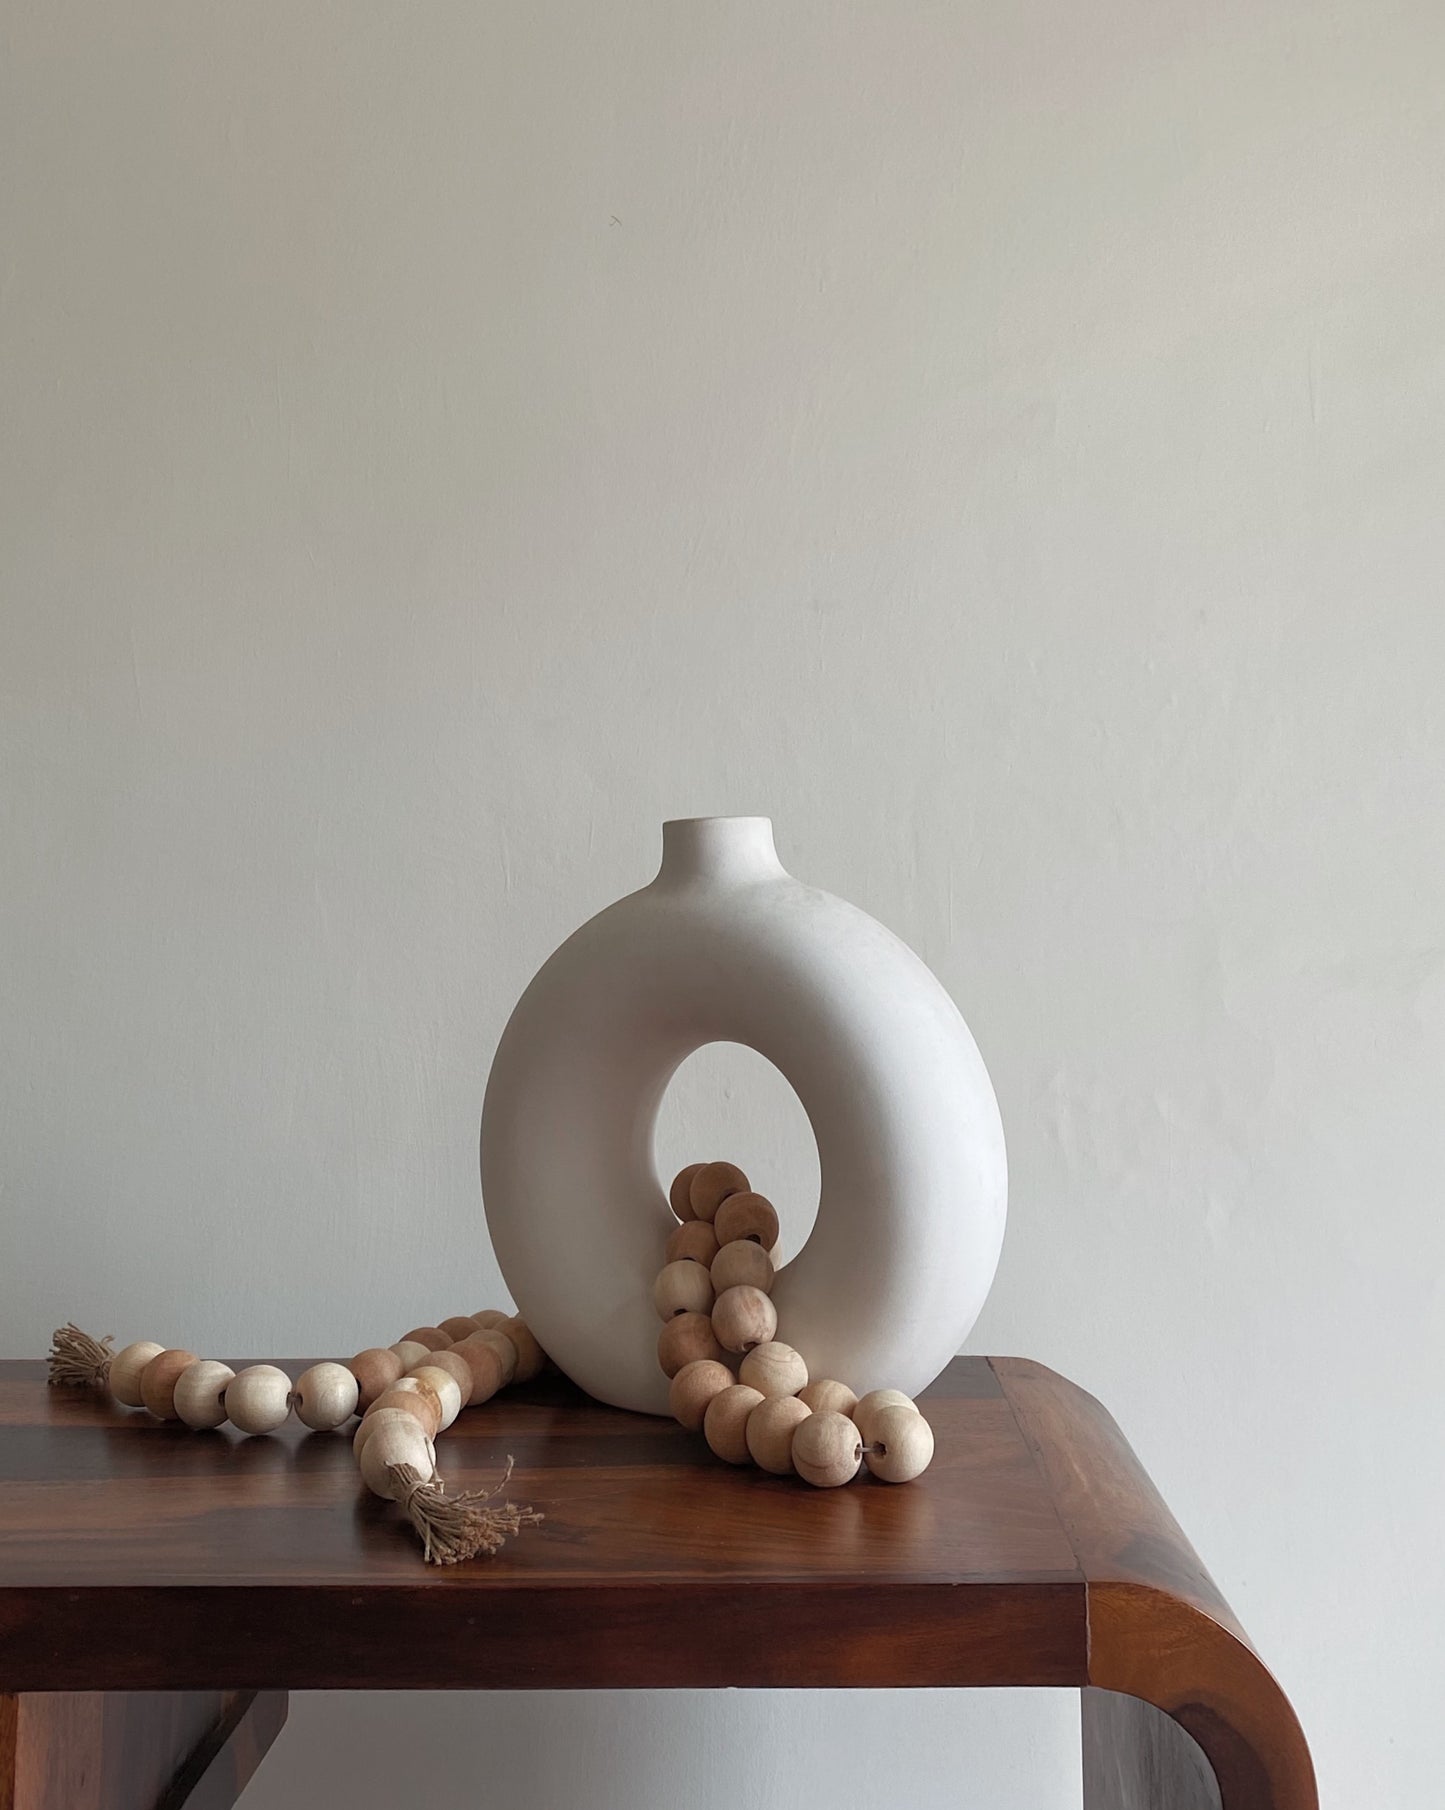 Wooden beads layered over a ceramic vase